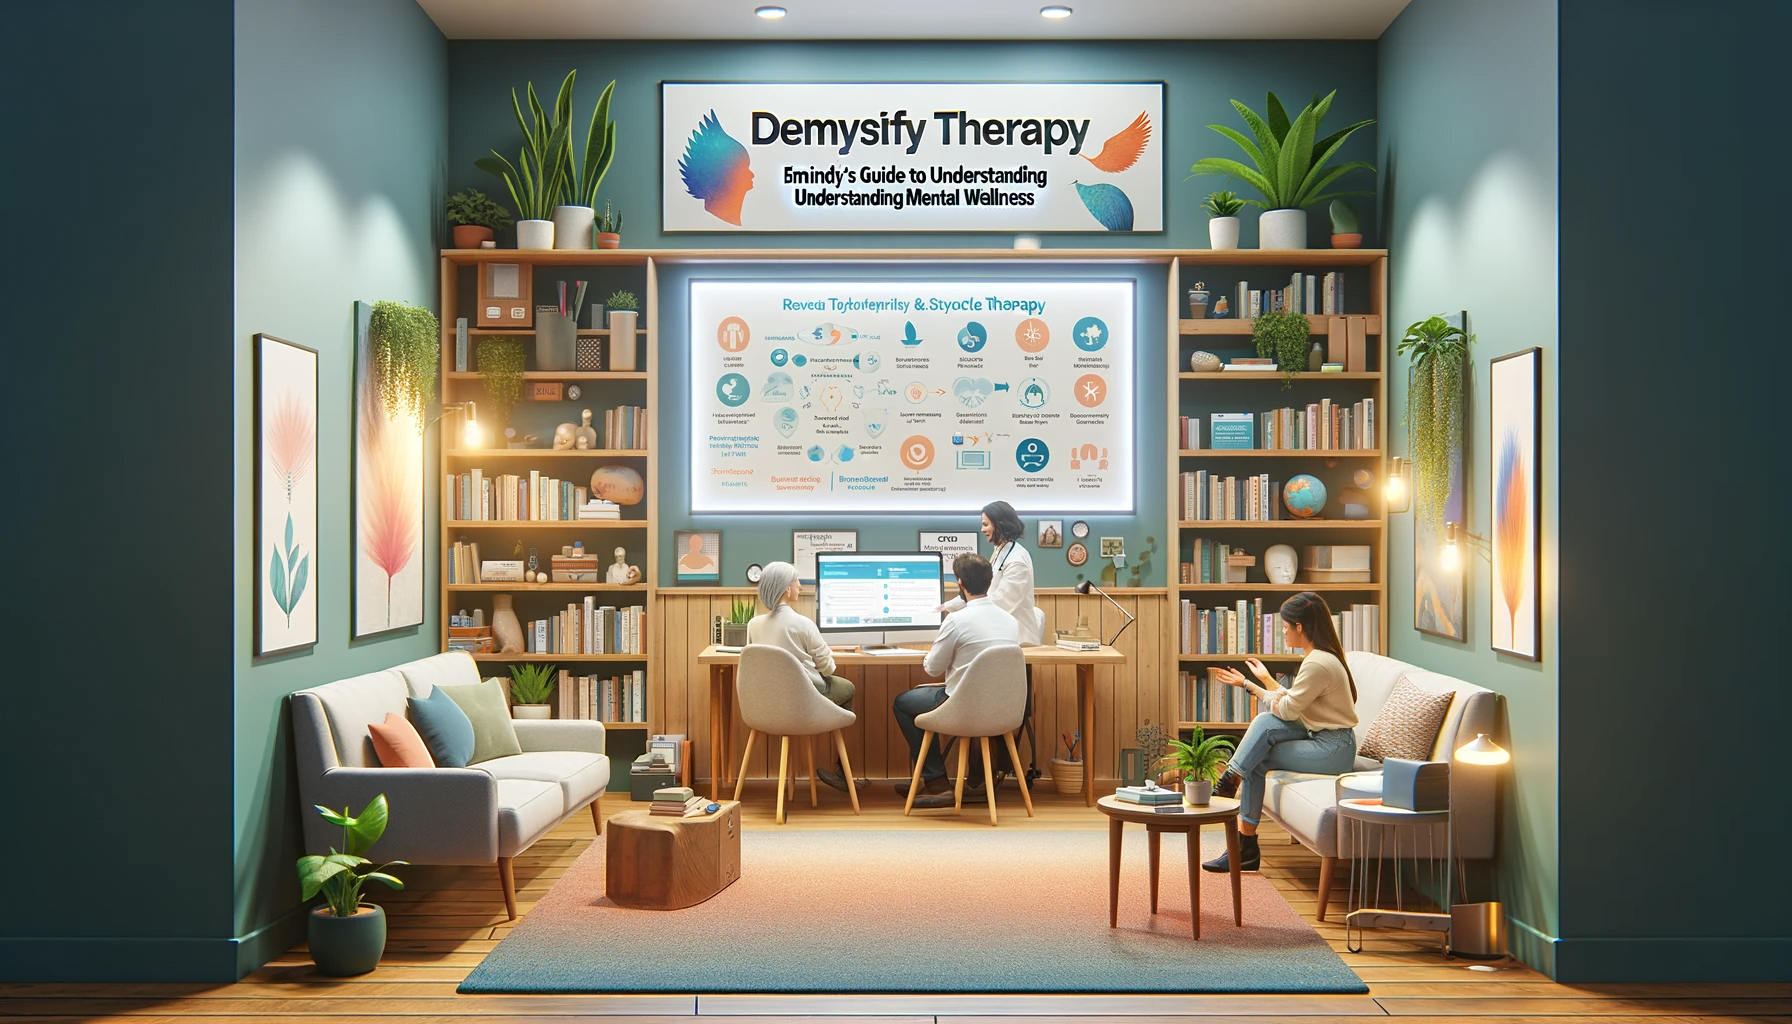 Demystify Therapy: eMINDy's Guide to Understanding Mental Wellness